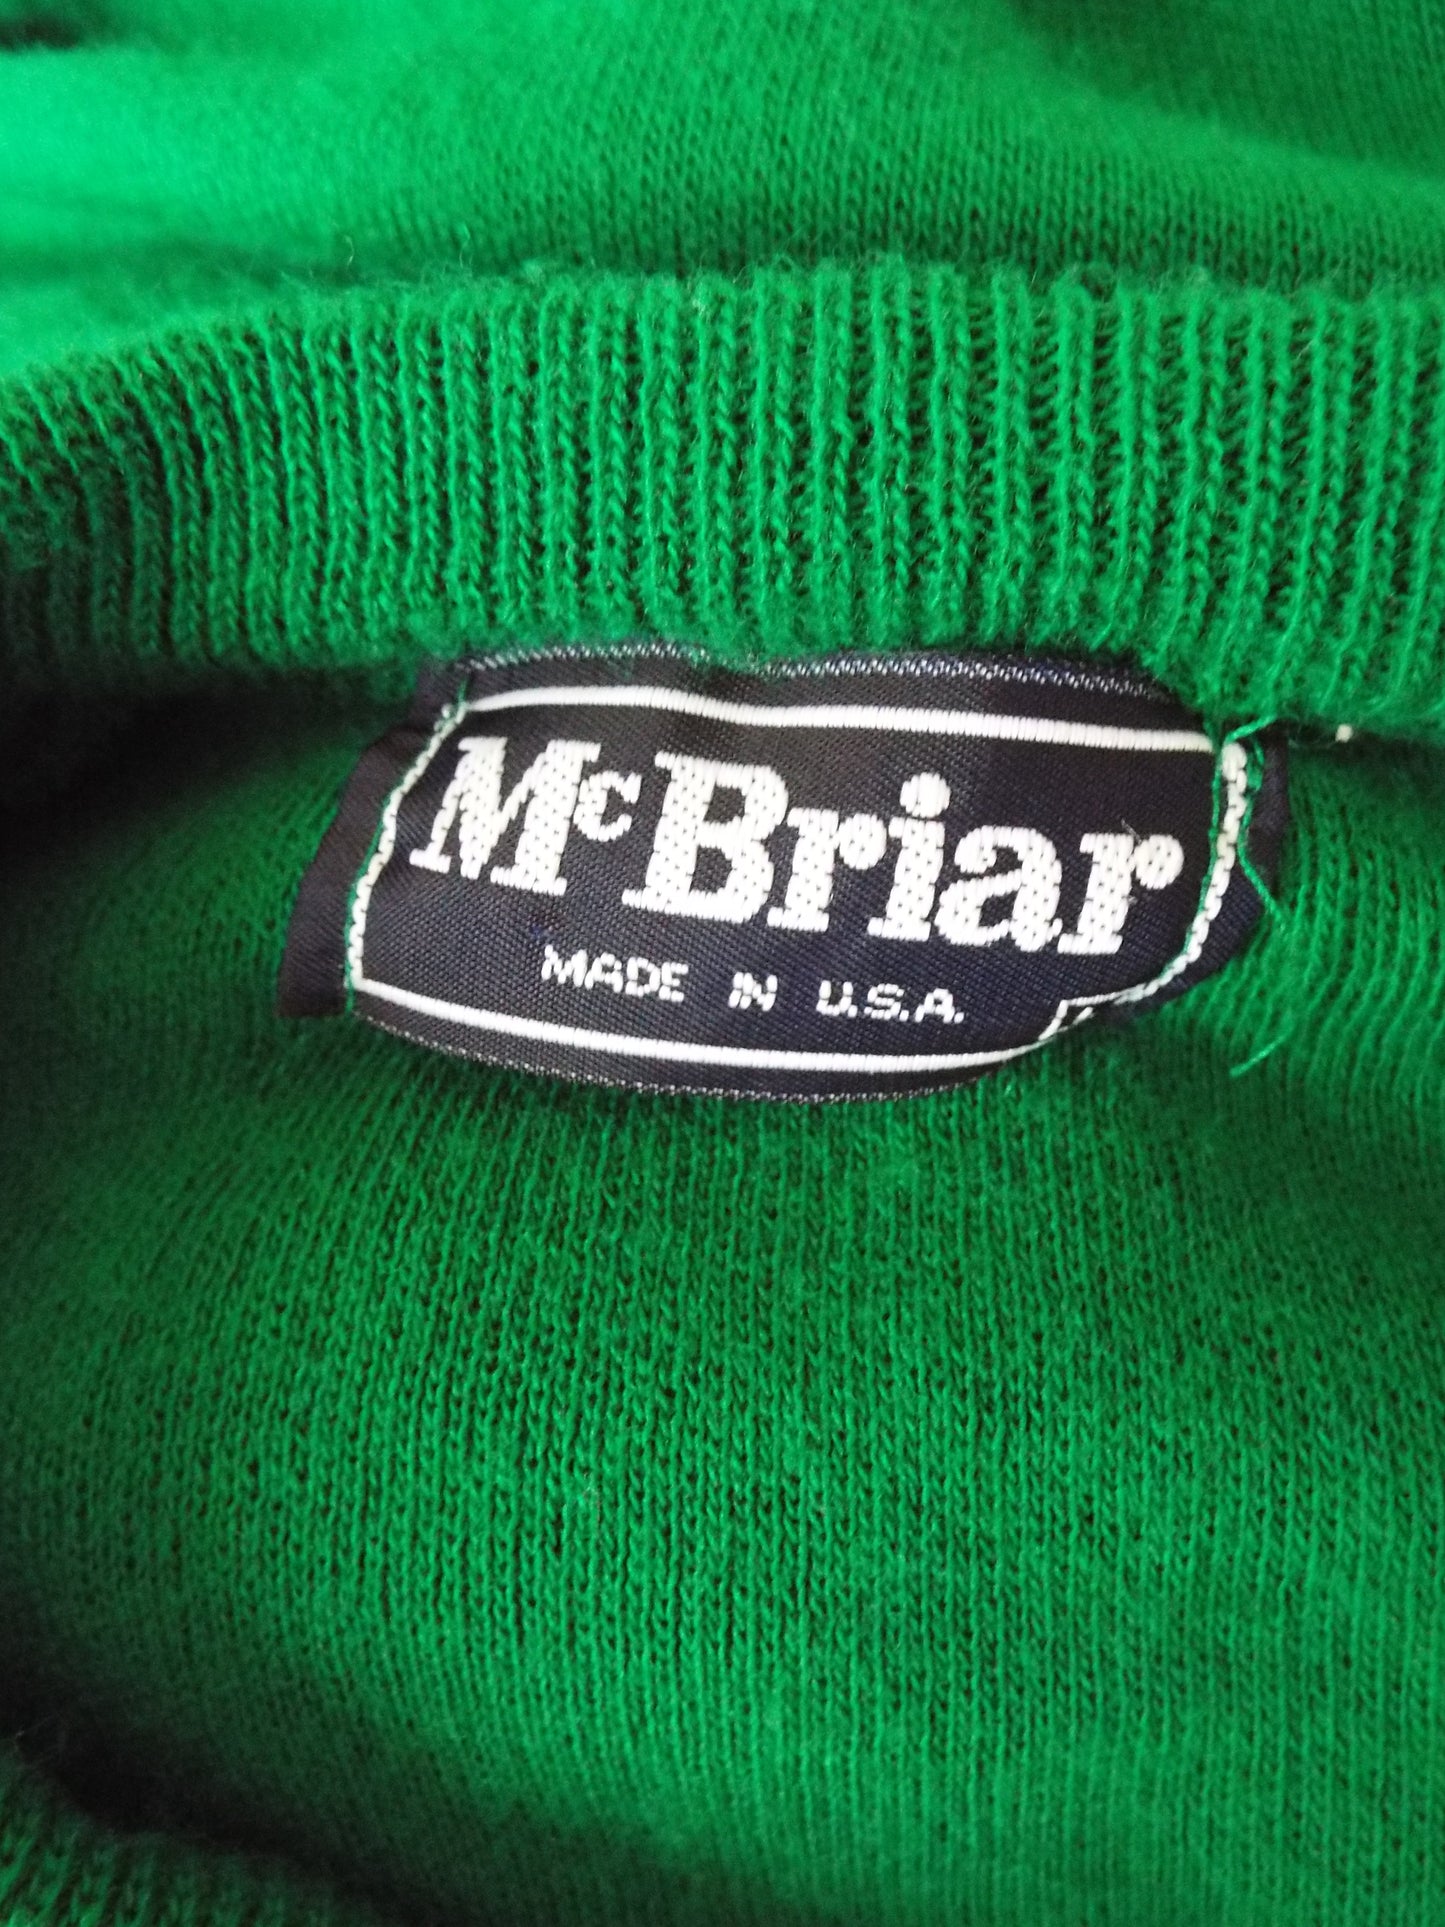 Vintage Long Sleeve Vee Neck Green Sweater by Mc Briar